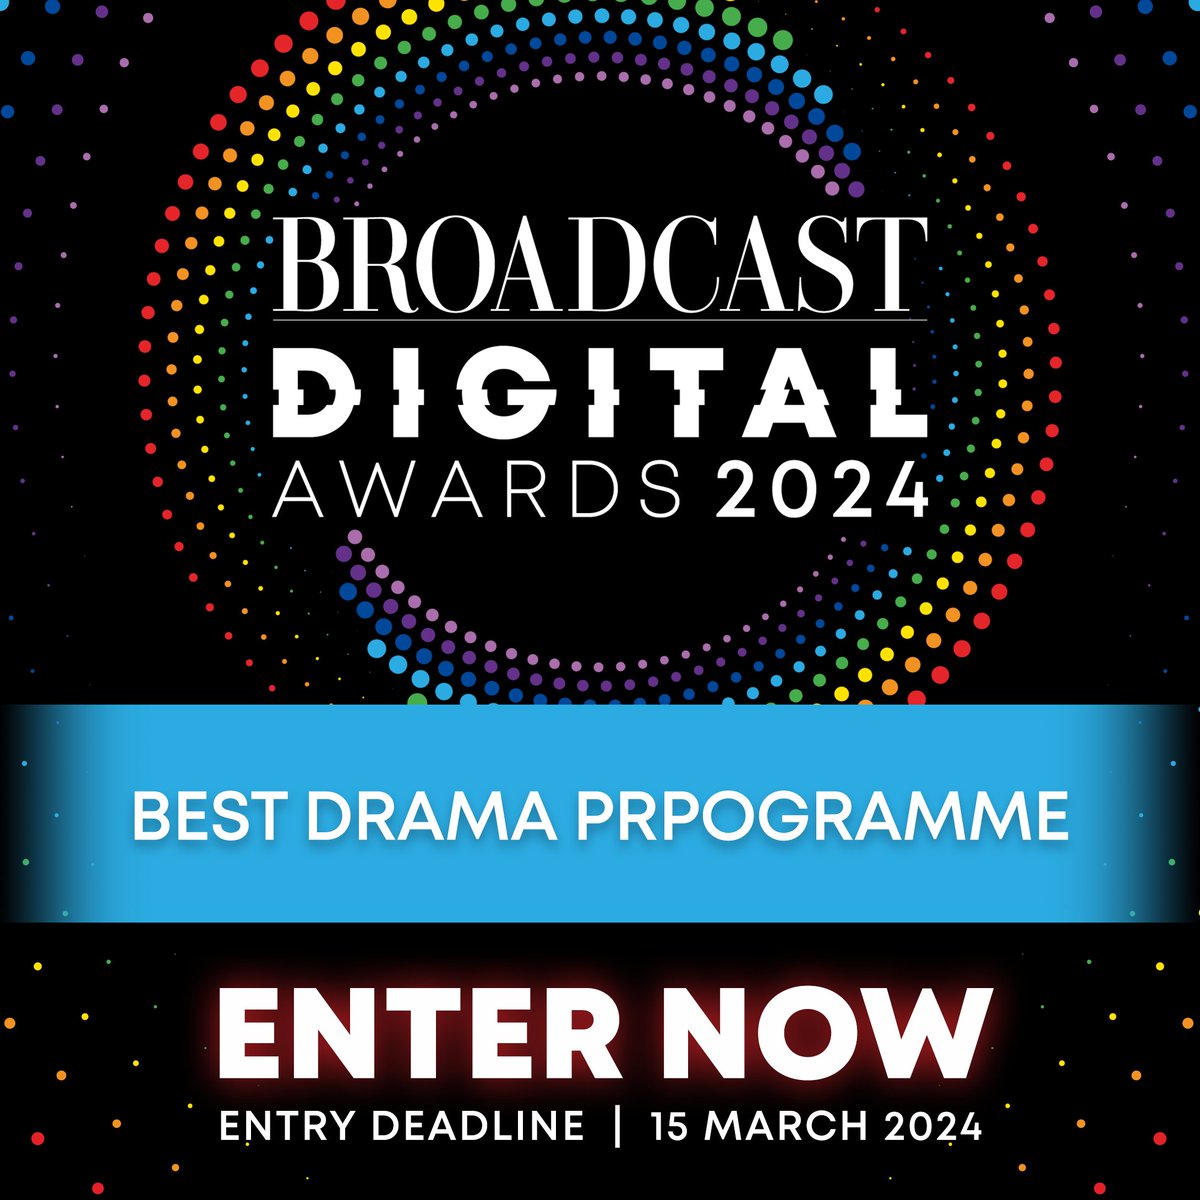 Enter now for the #BroadcastDigitalAward category Best Drama Programme which rewards the best and most creative digitally exclusive #drama programme including ongoing series, single dramas, or mini-series. Enter now at: bit.ly/BDA24Enter #BDA2024